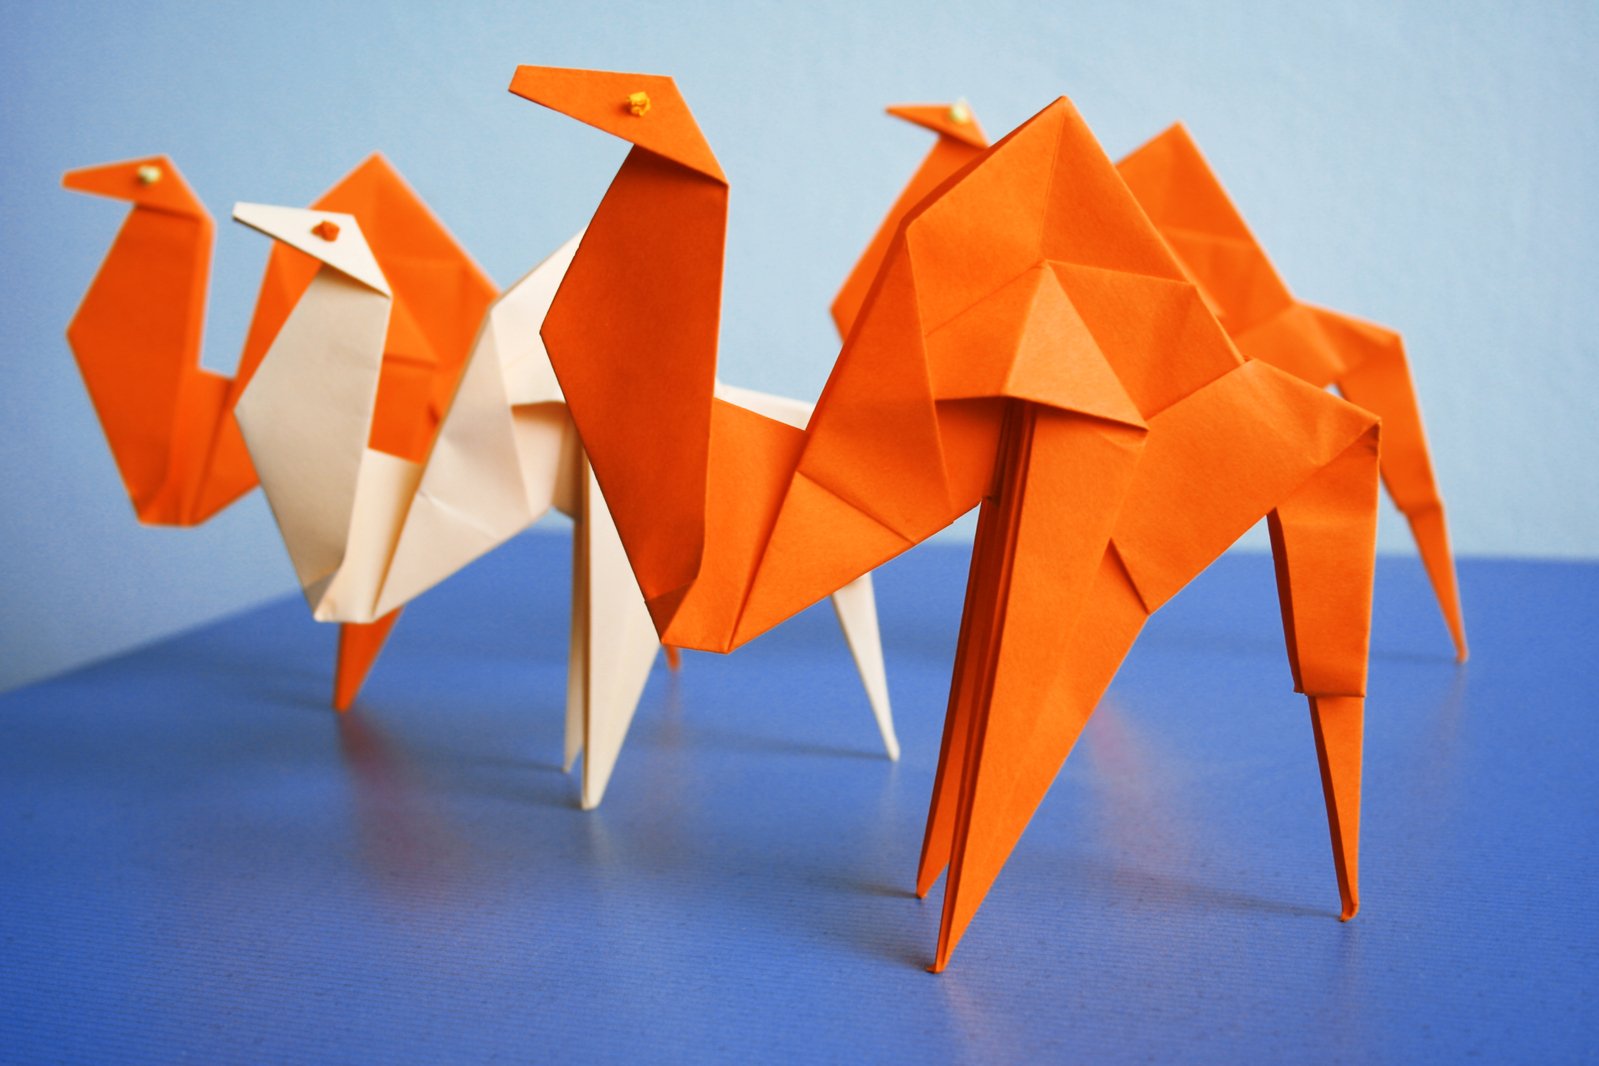 the orange bird origami is next to another bird on a blue surface